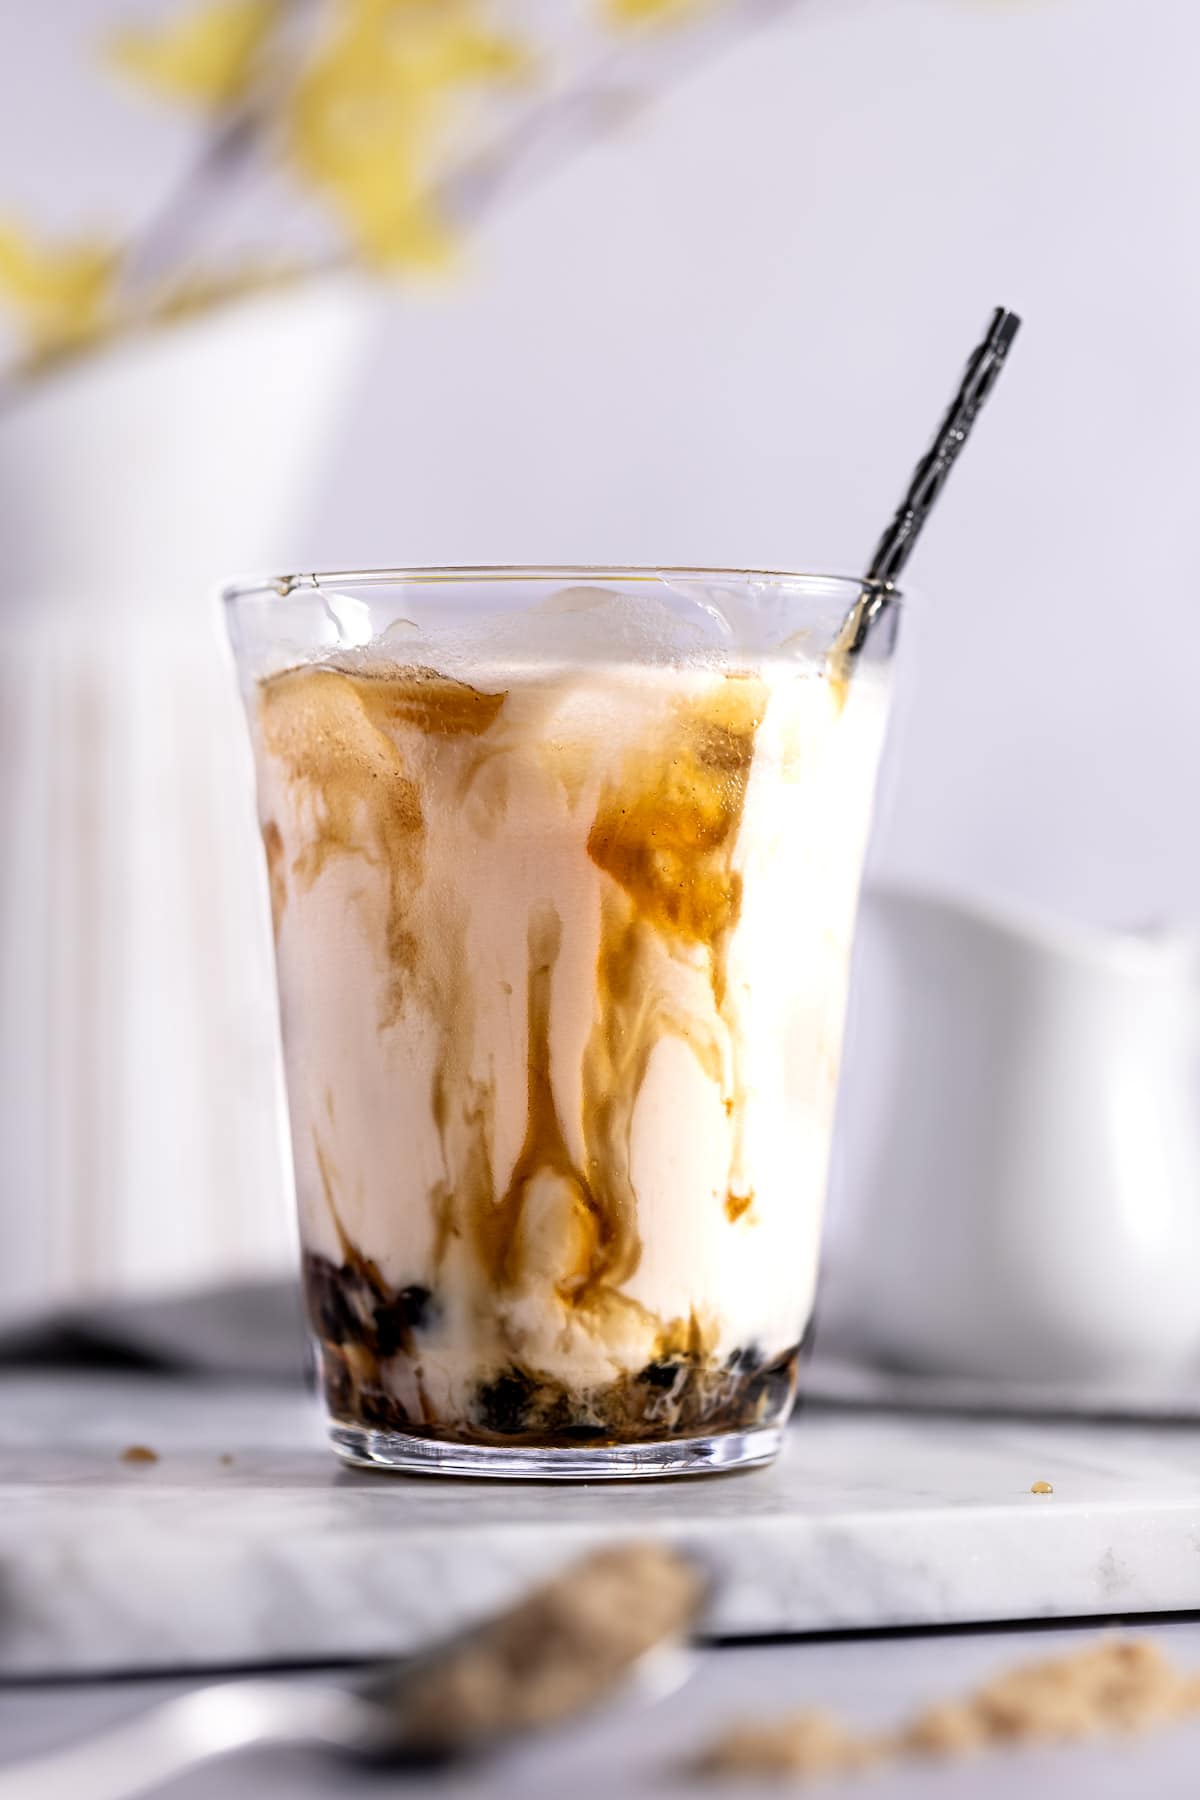 Up close of a glass of brown sugar milk tea with the brown sugar dripping down the sides as it mixes in with the milk and cooked boba pearls.